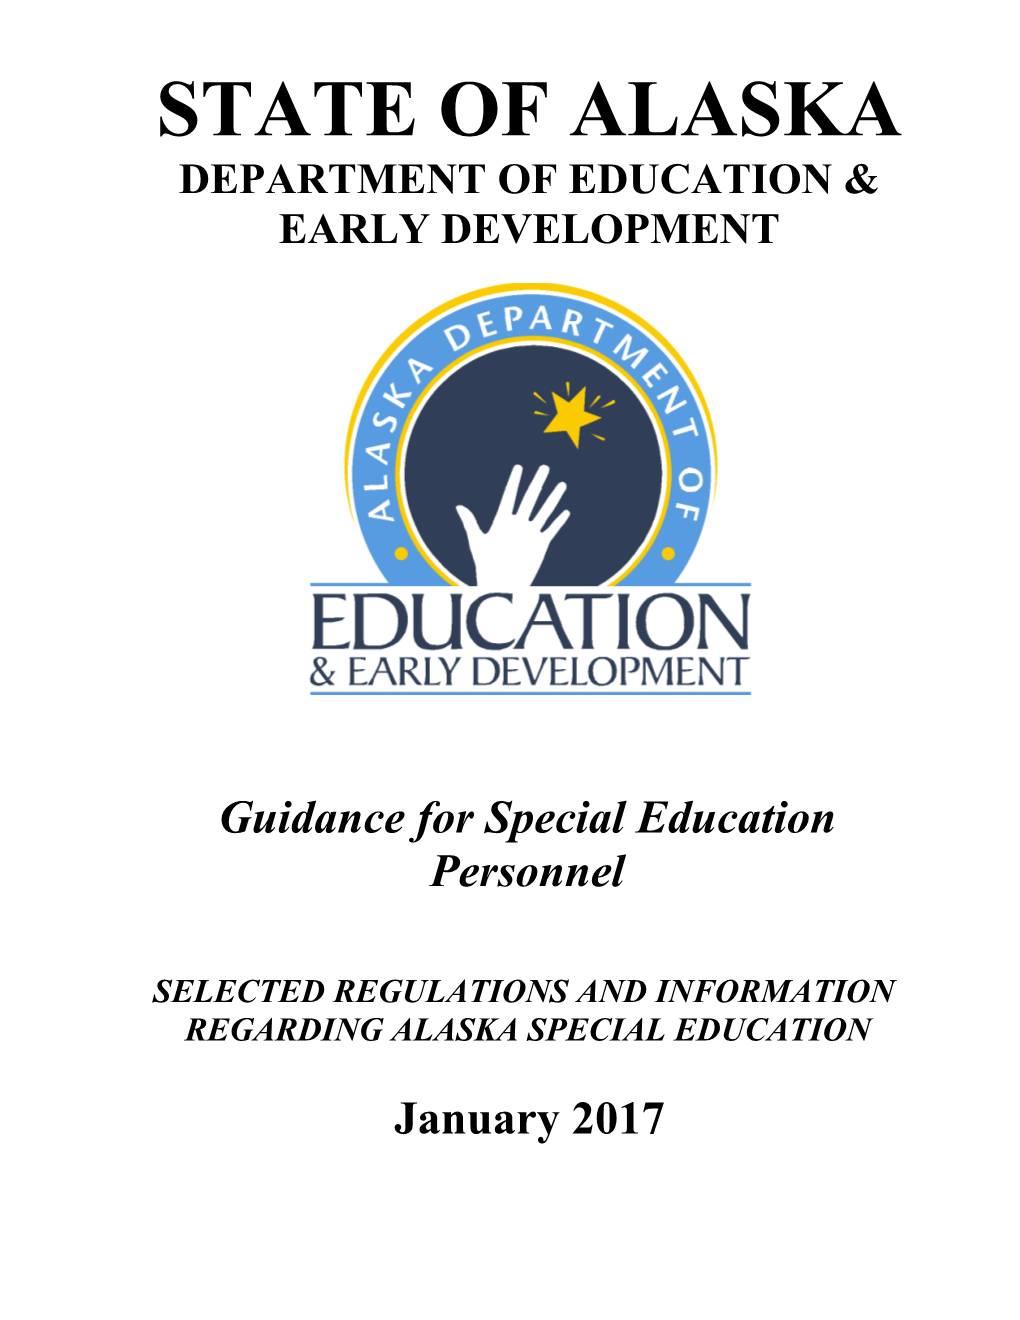 Guidance for Special Education Personnel